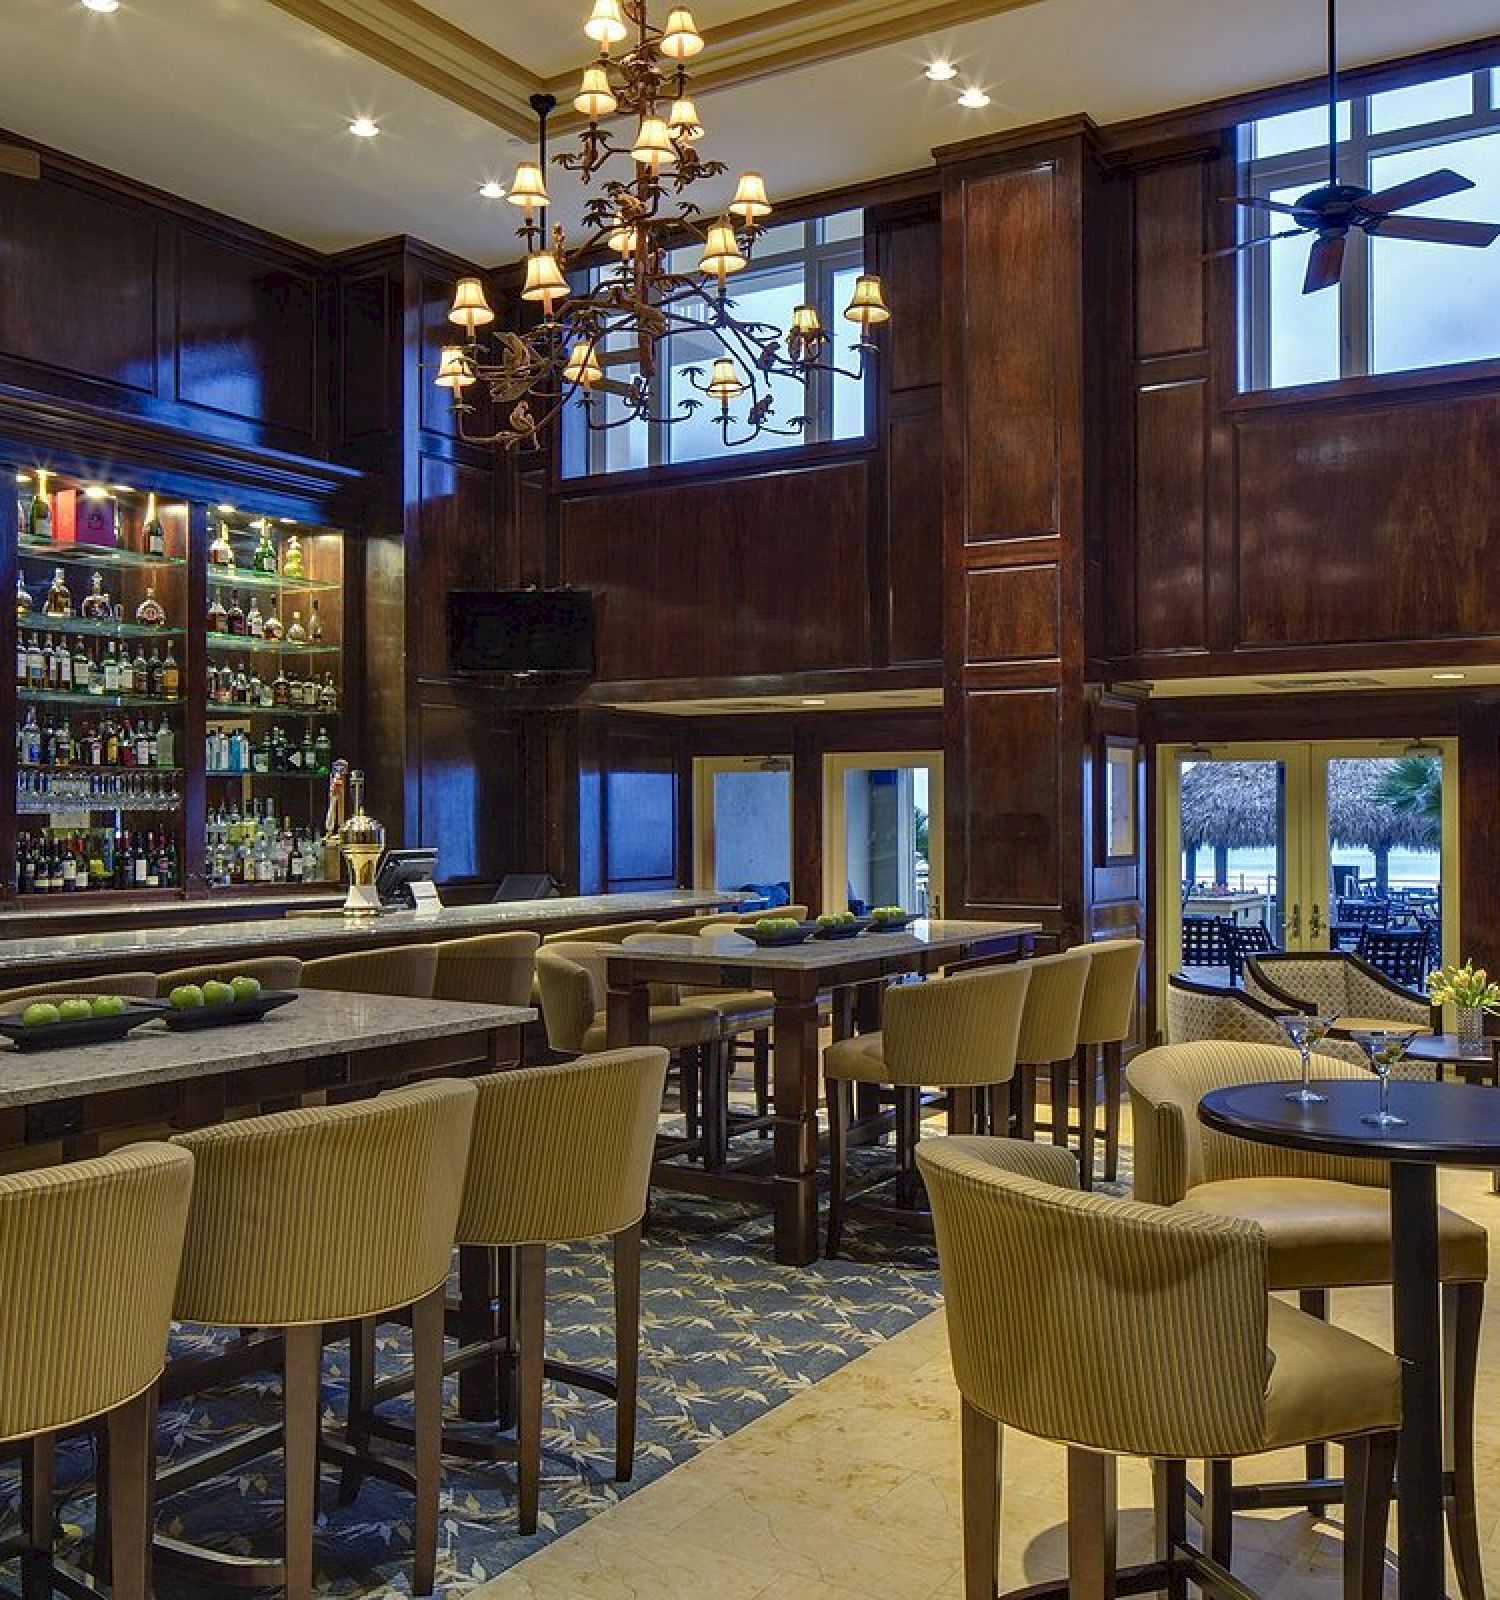 The image depicts a well-furnished bar with high stools, tables, a chandelier, a stocked bar, and large windows looking out to a scenic view.